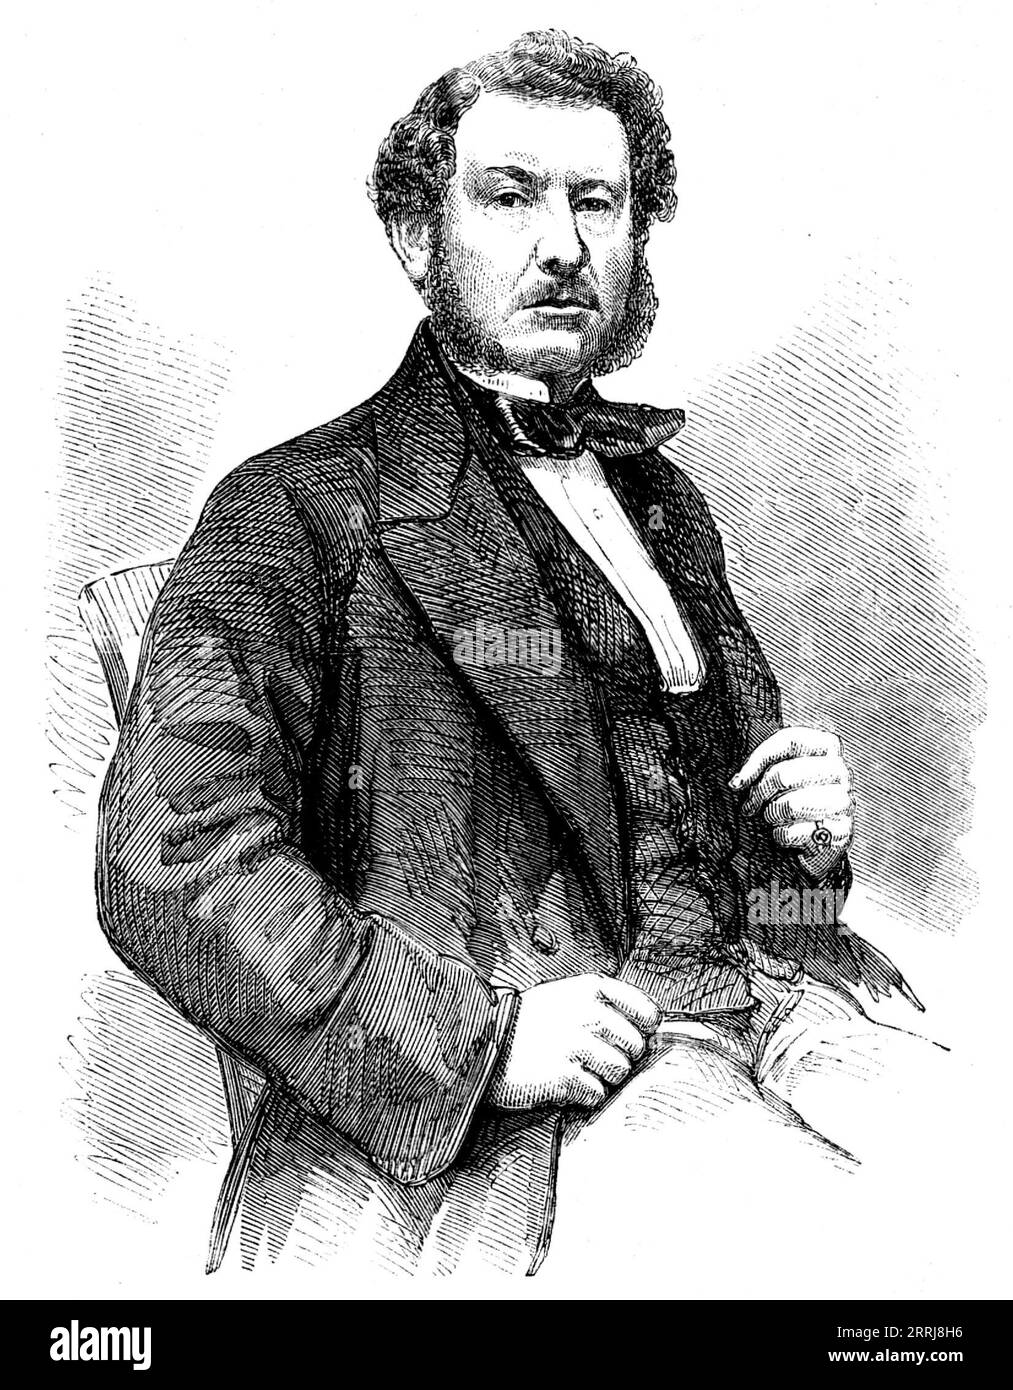 Captain William Harrison, Commander of the &quot;Great Eastern&quot; Steam-ship, 1858. Engraving from a portrait taken by Mr. Beard, photographer, King William-street.'...in 1842, [Harrison] joined the service of the Cunard line of packet-vessels trading between Liverpool and North America...he earned for himself the reputation of being the best officer in the company's employ, having uniformly accomplished his voyages in the shortest space of time, and having incurred the fewest losses...Captain William Harrison is entirely indebted for his eminent position to his own individual talent and en Stock Photo